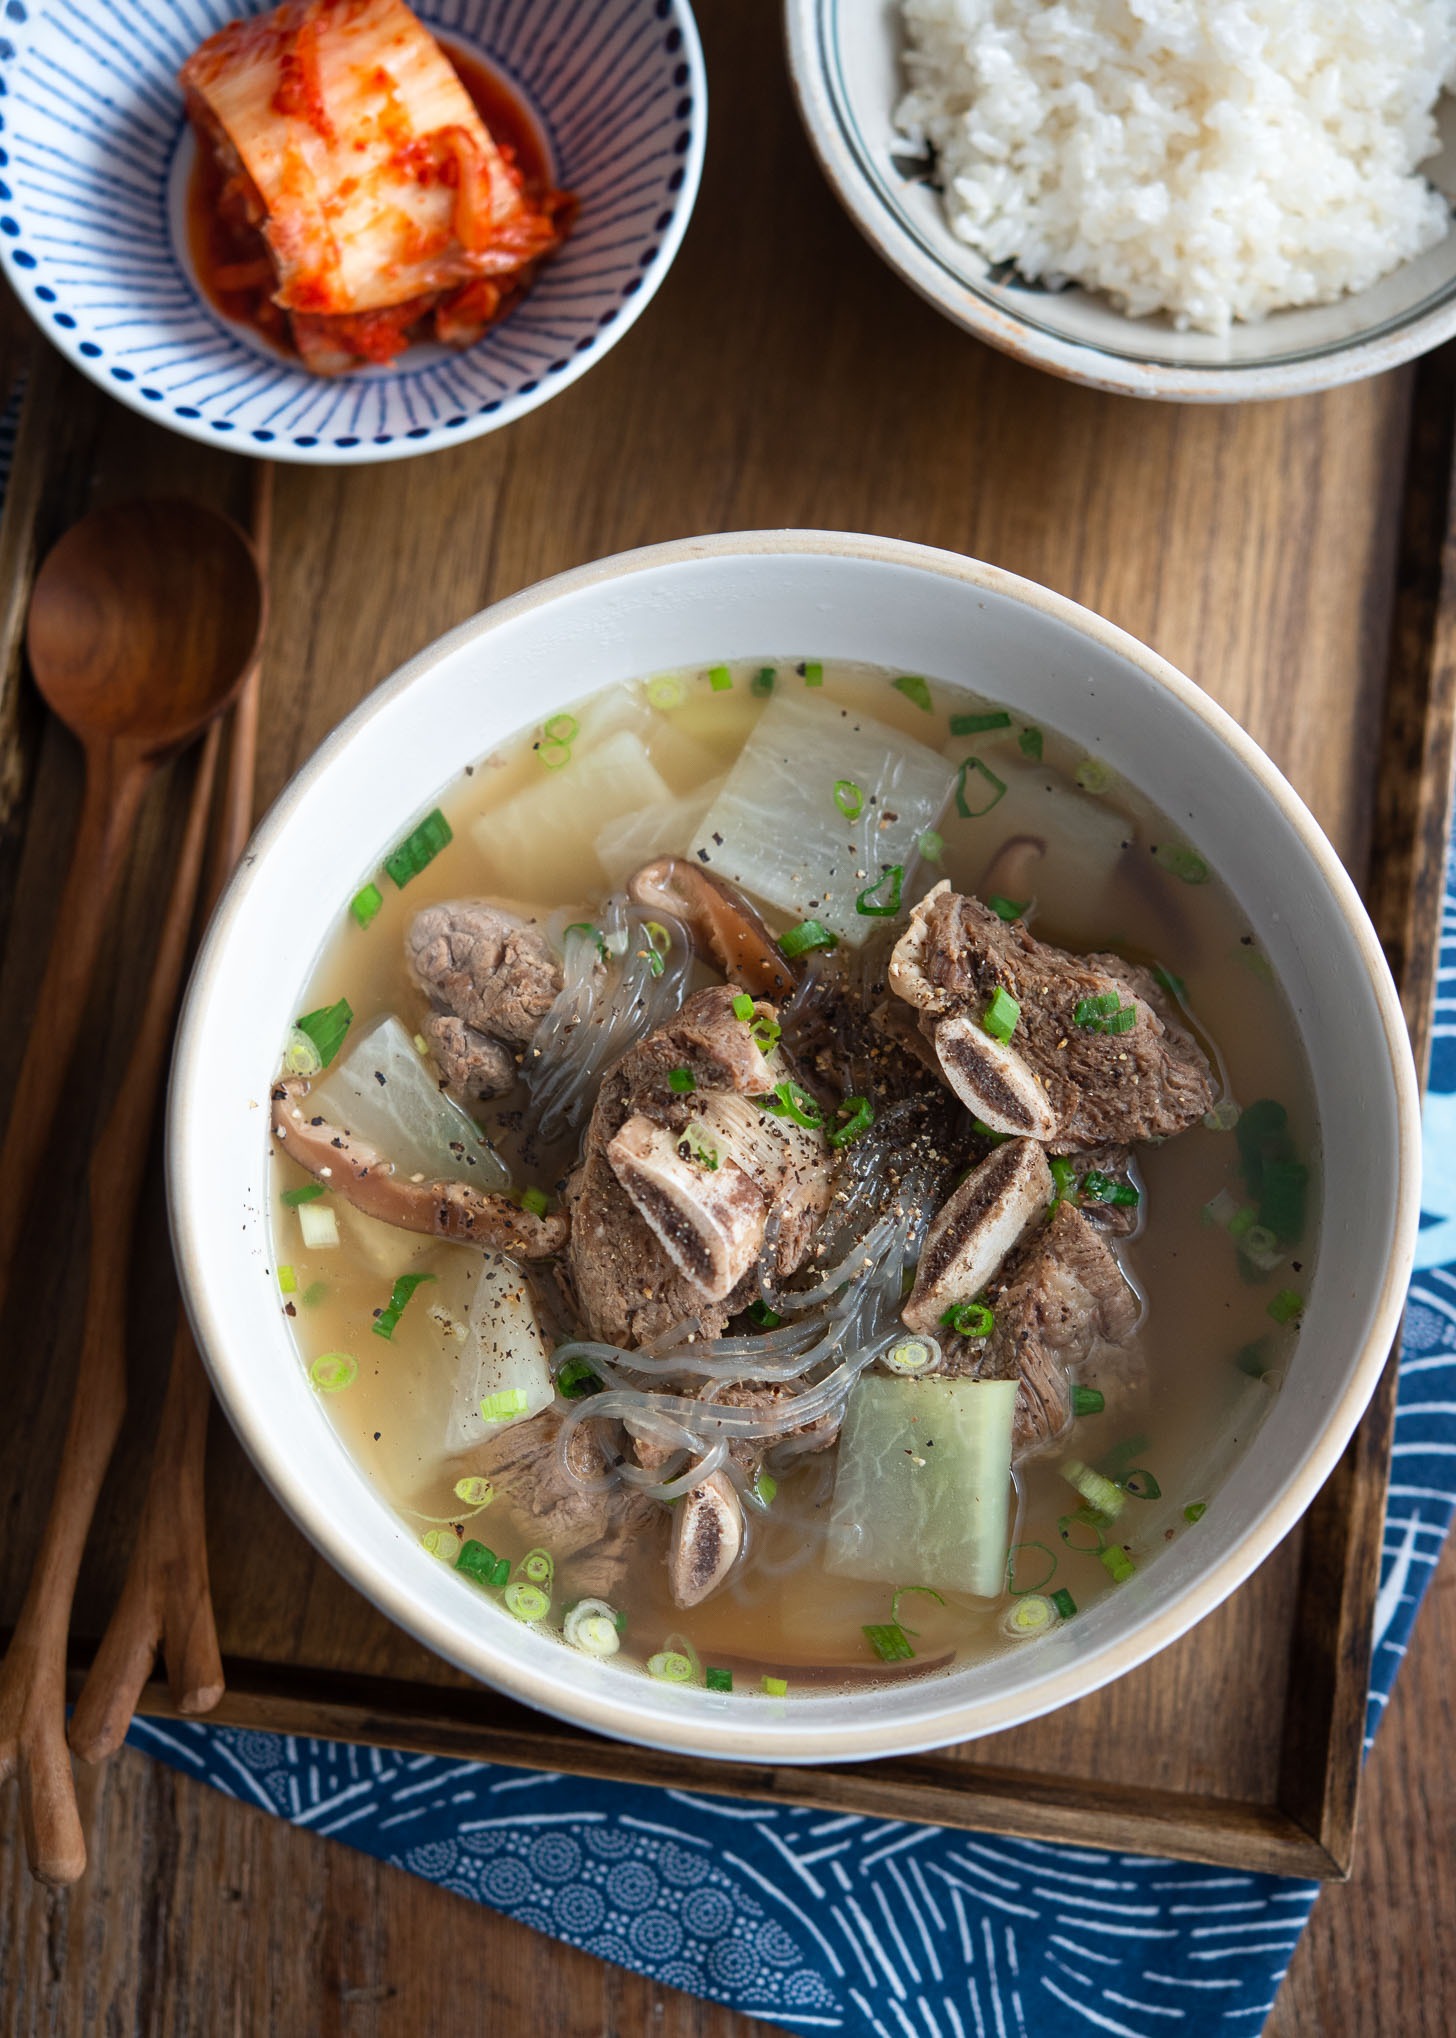 Galbitang soup made with beef short ribs are served with rice and kimchi.